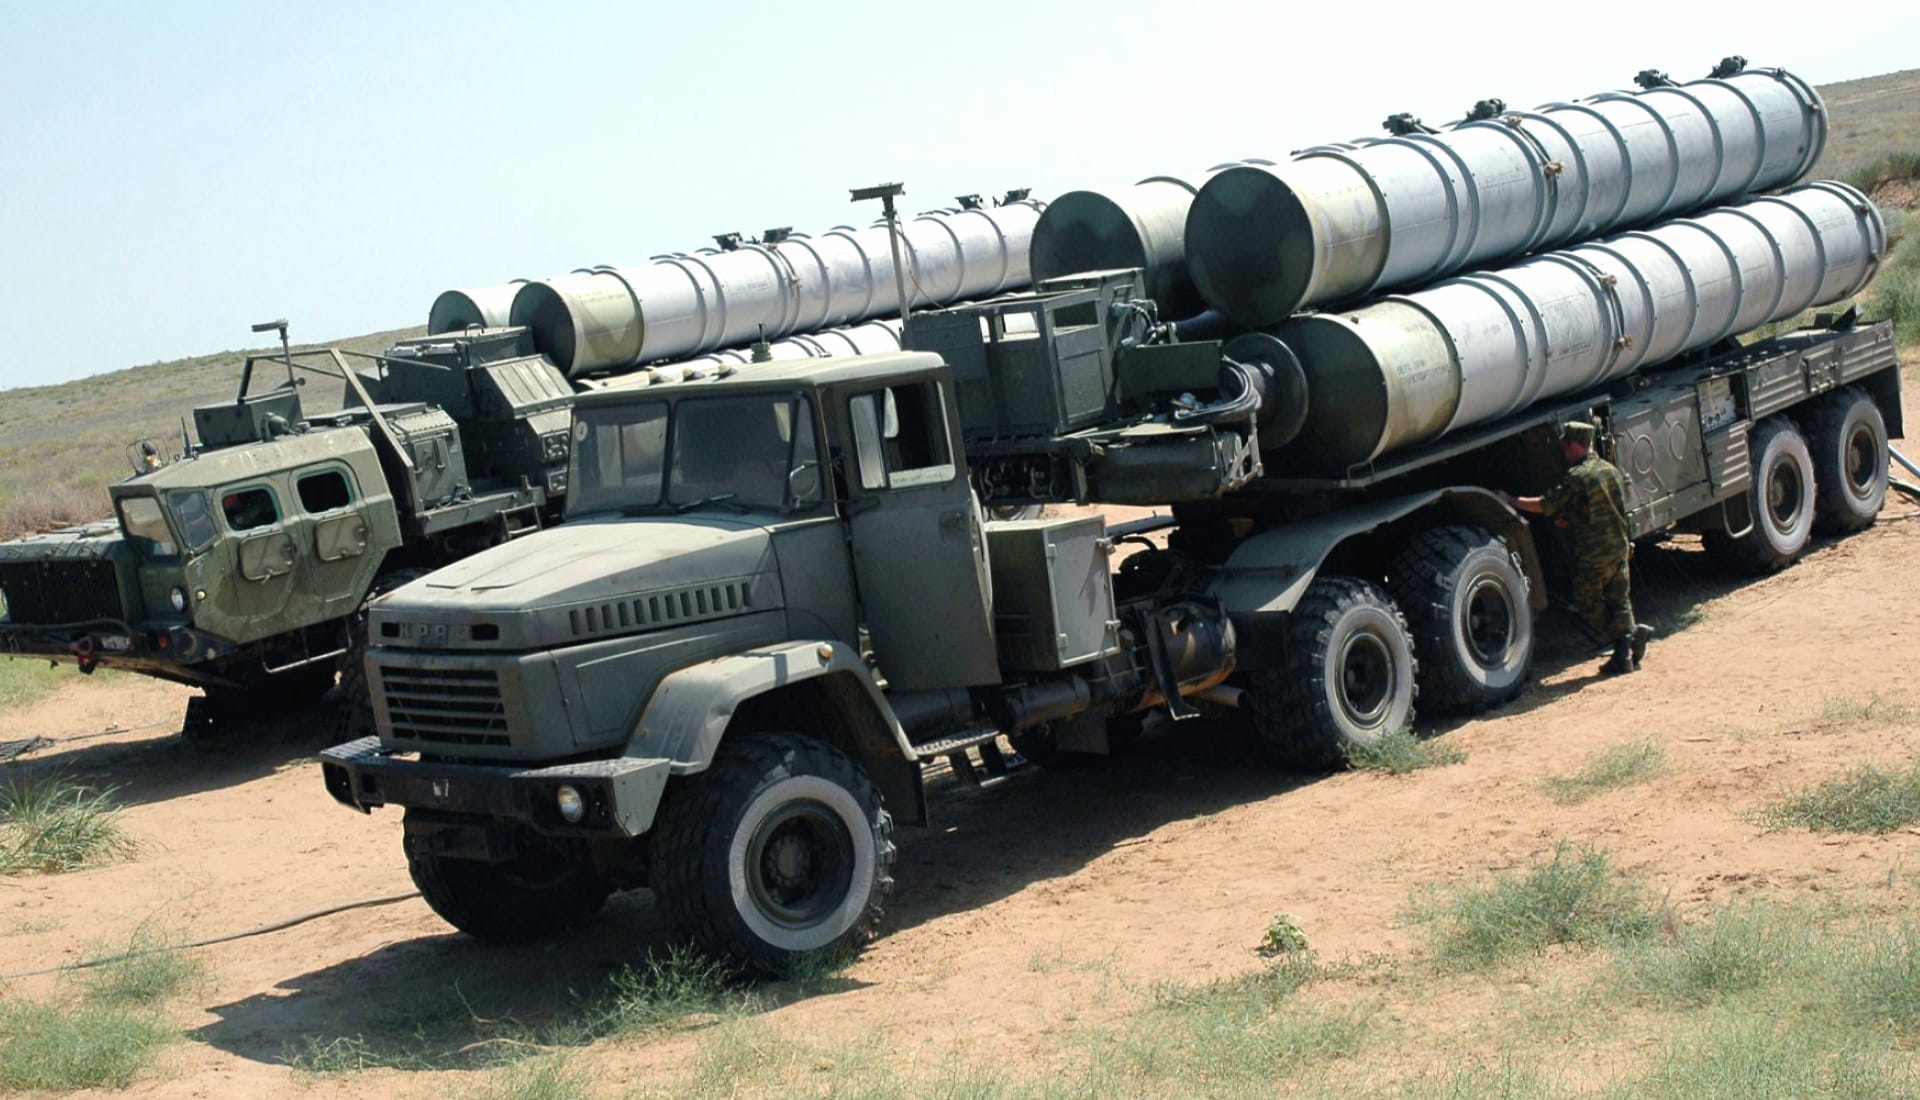 S-300 Missile System wallpapers HD quality